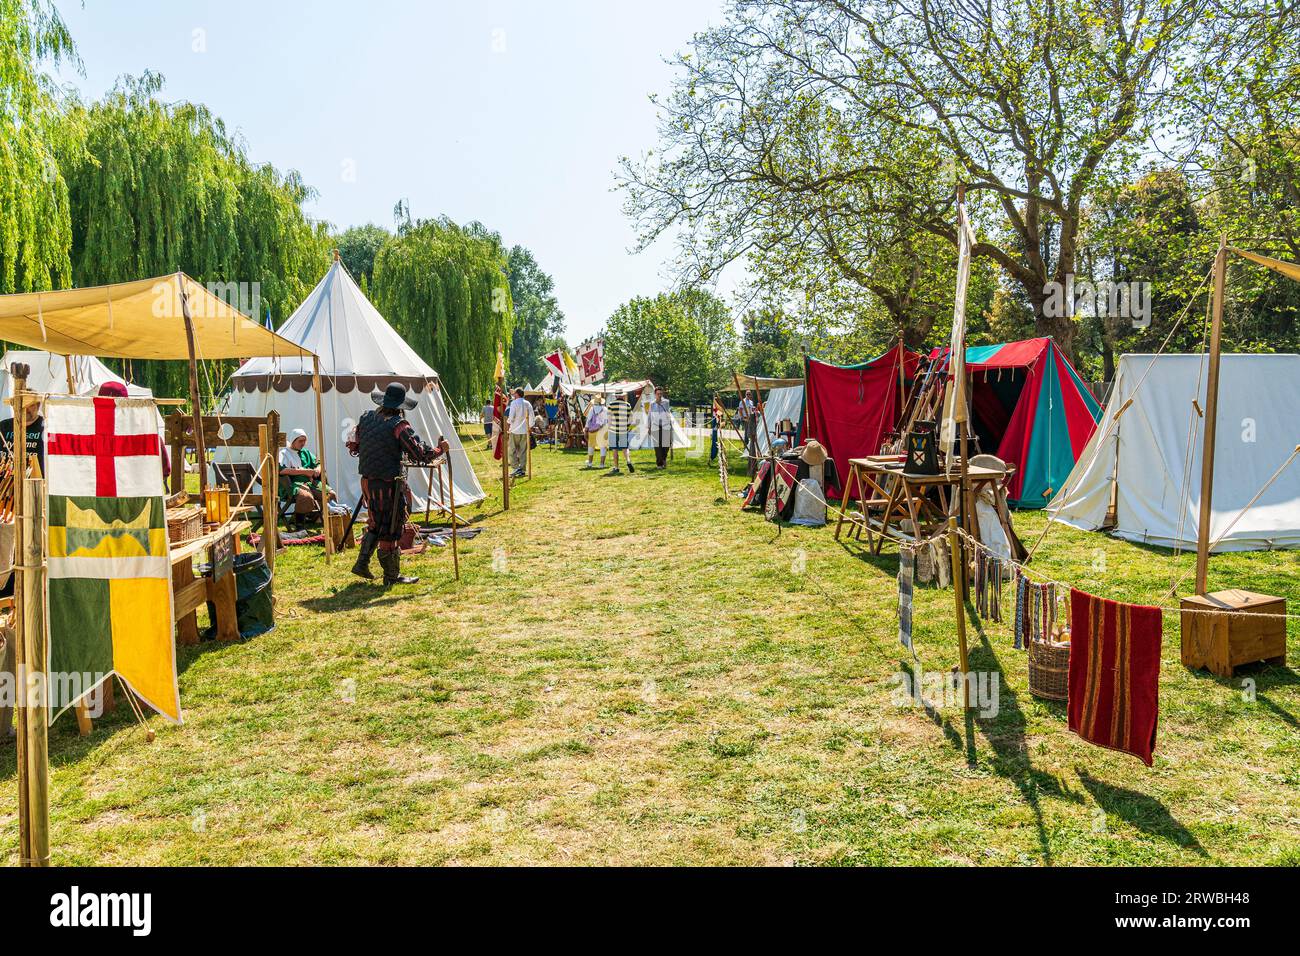 Medieval living history encampment on the Green at the old Kent town of Sandwich. Various types of tents set up with crafts and trades on display. Stock Photo